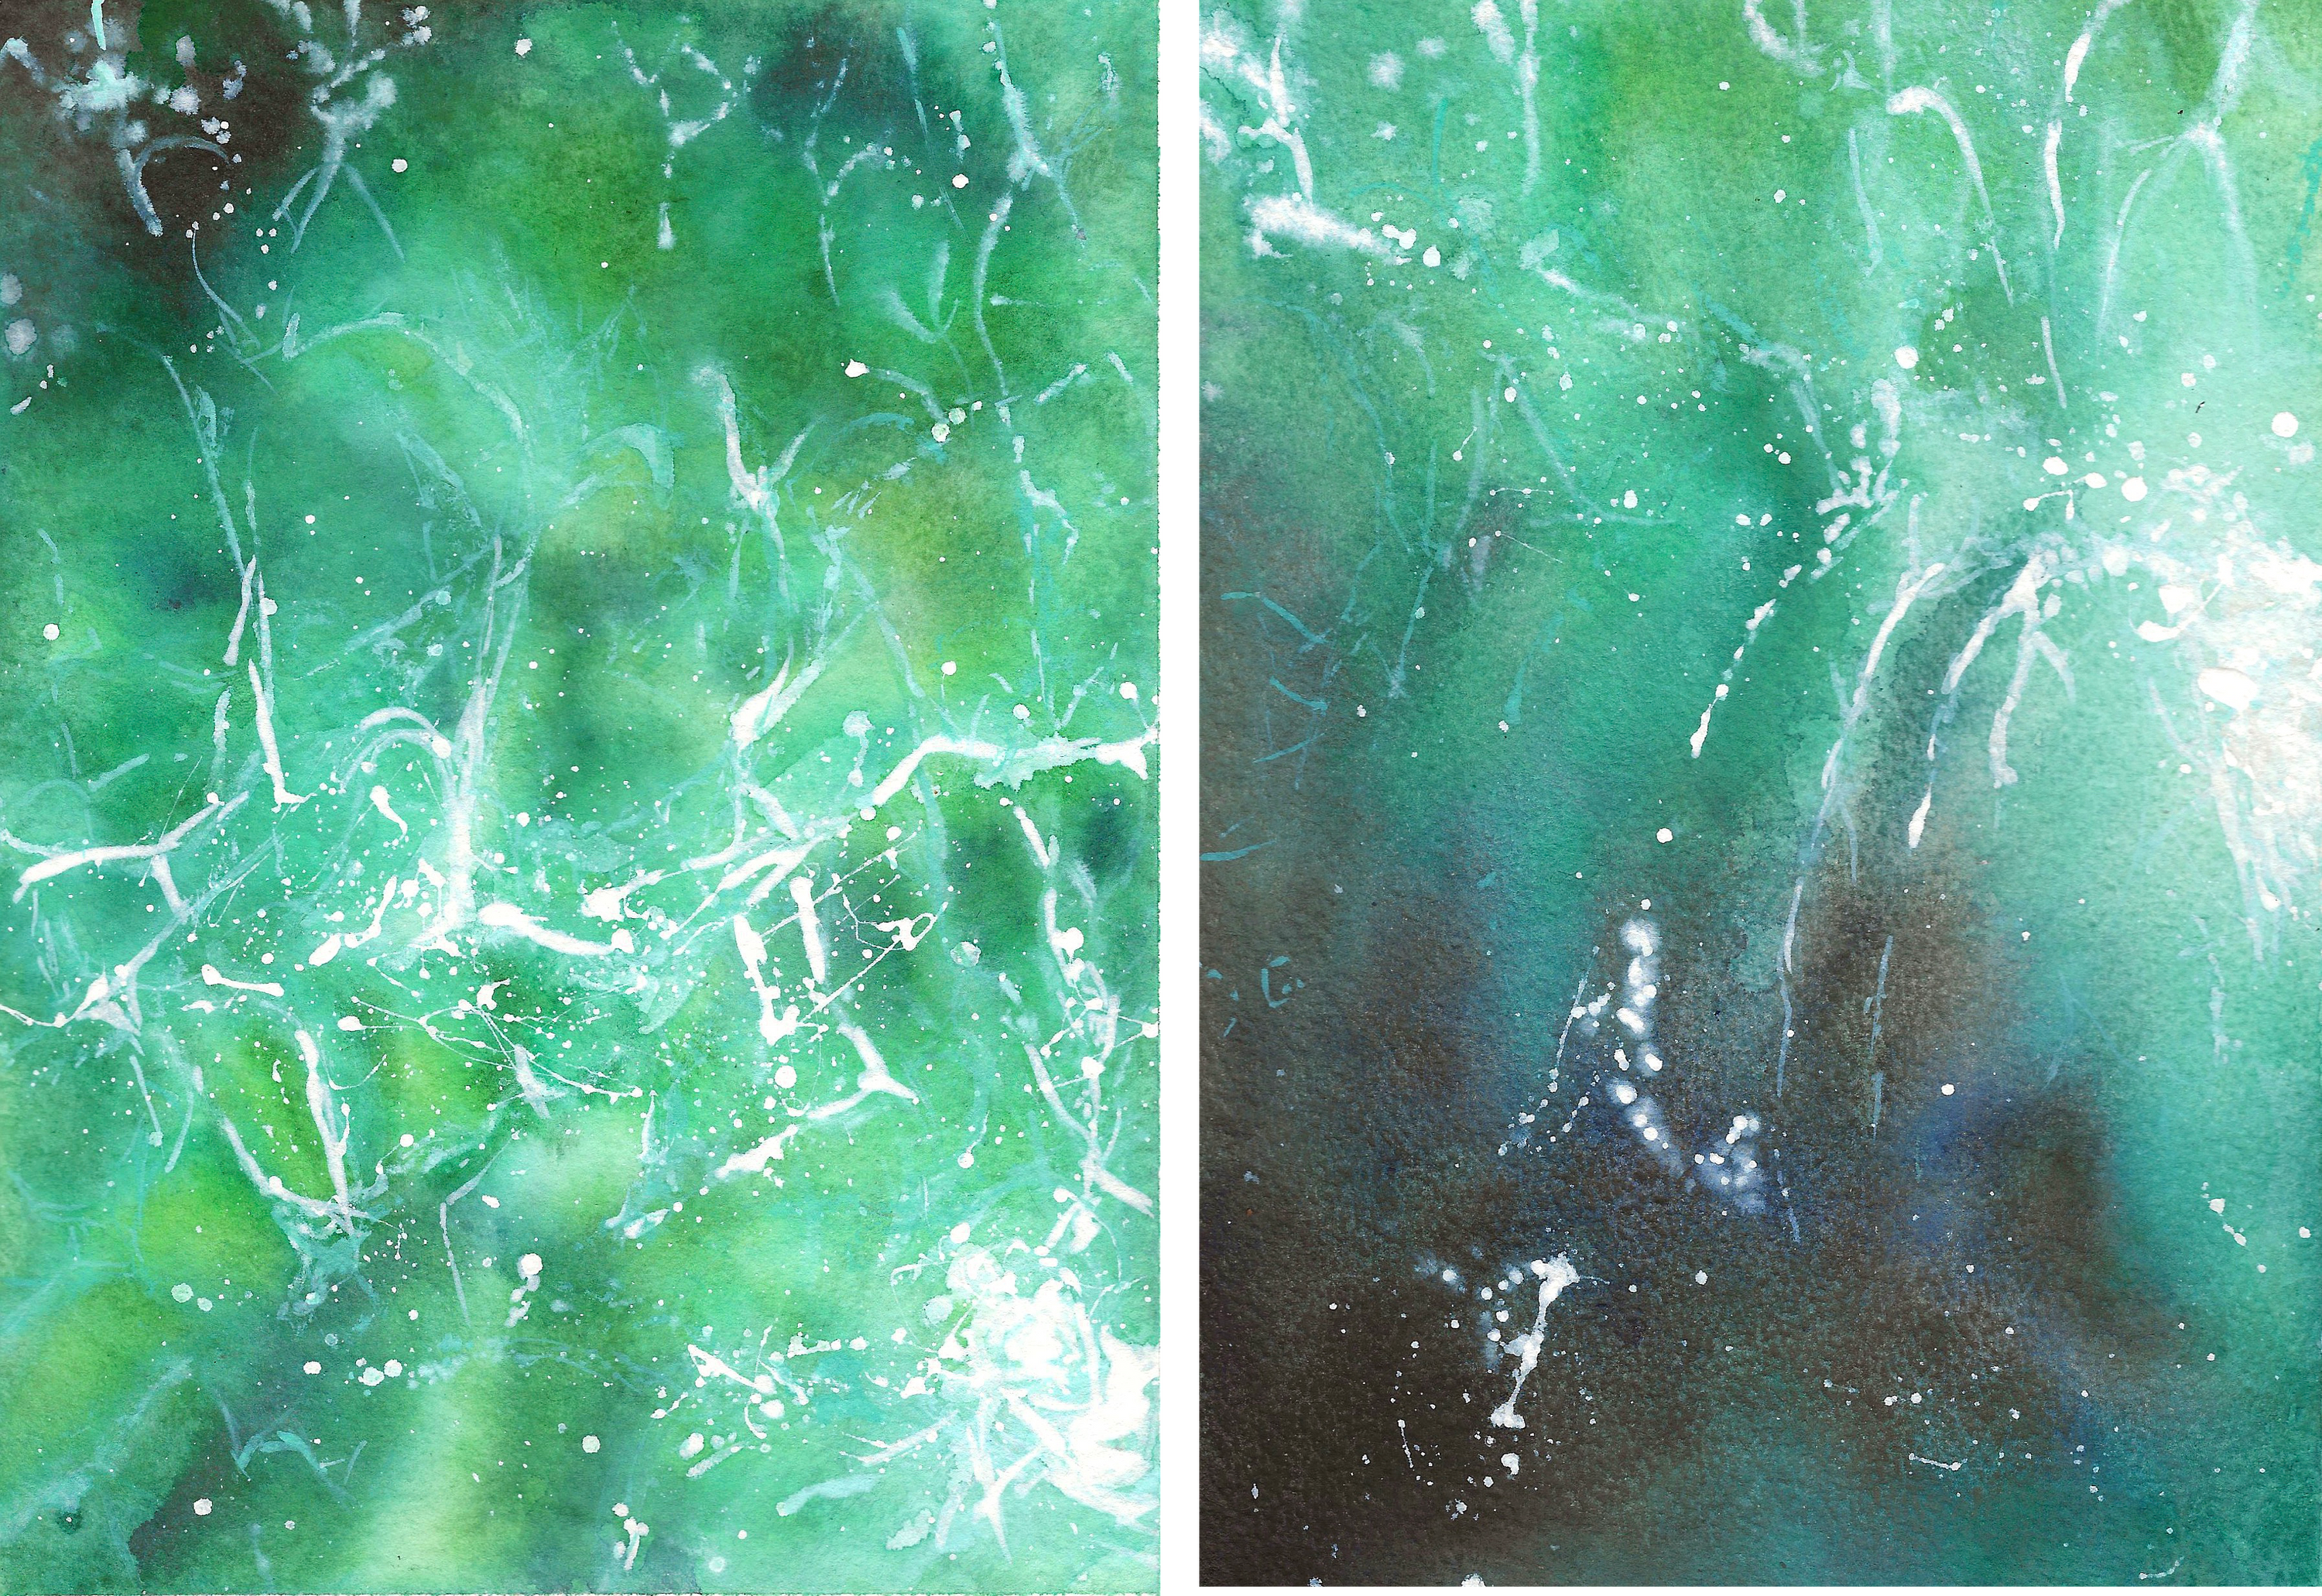 diptych bc ferries 3 + 4 - watercolour and gouache - 148 x 210mm ish - 640gsm 300lbs